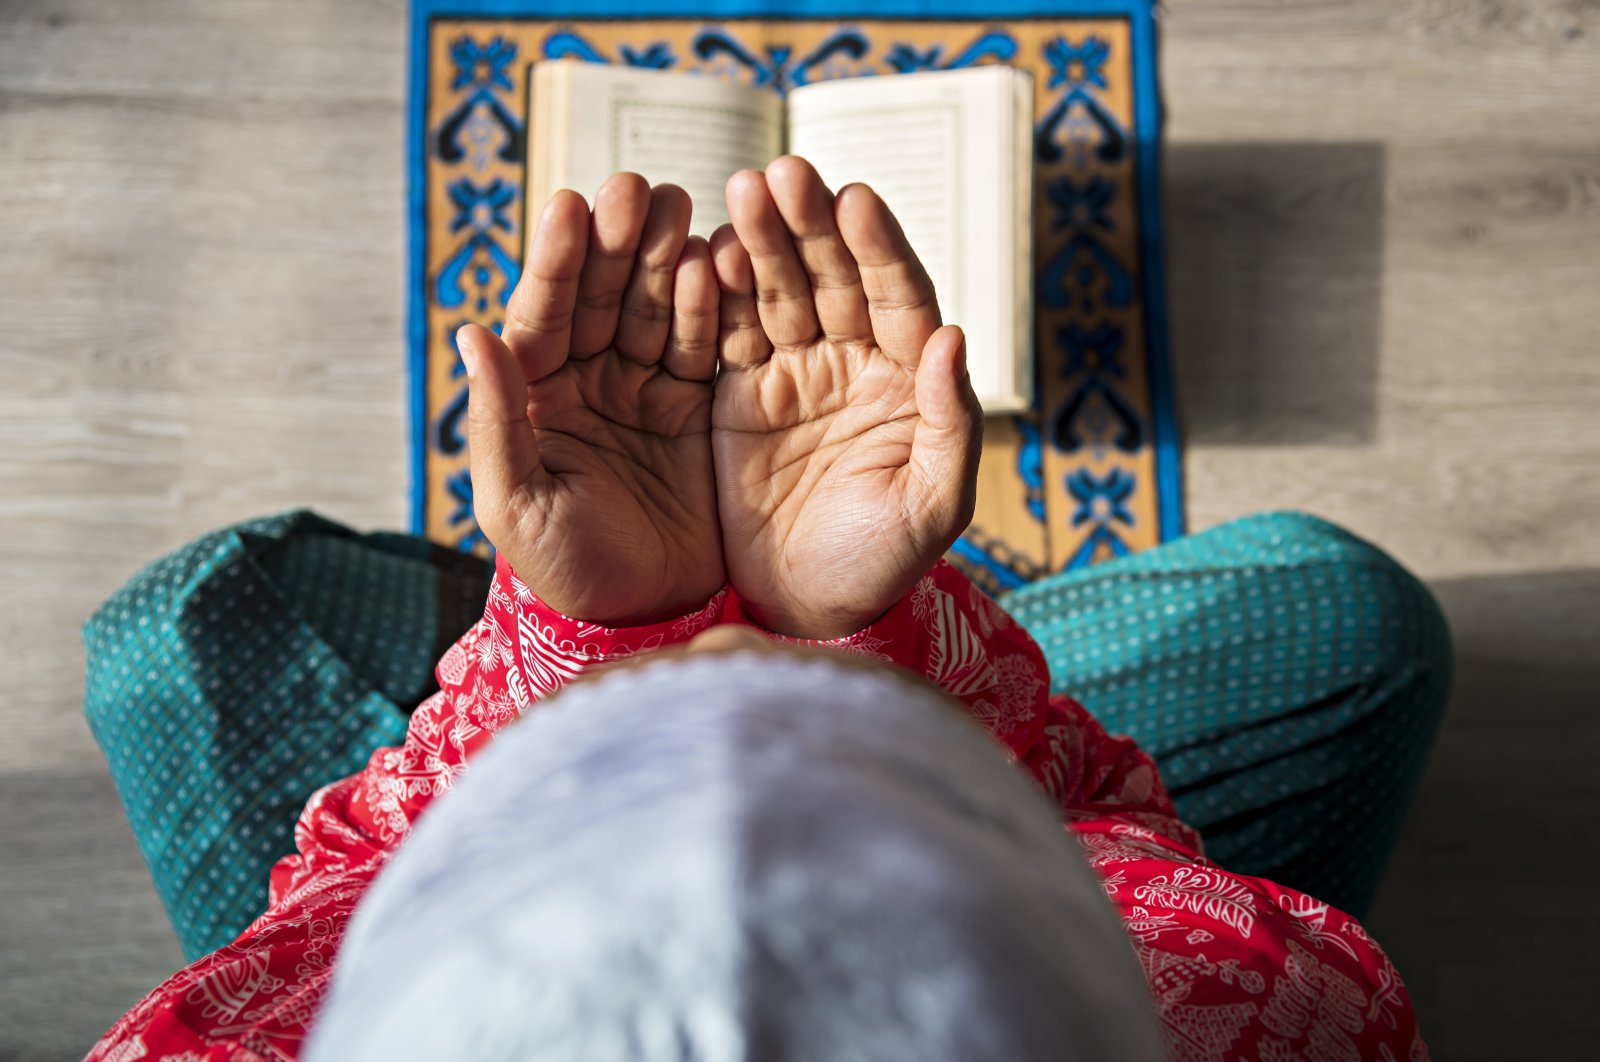 Islam is “universal” when inviting people to its teachings but offers absolute felicity only to the ones who attain the knowledge of the whole. (Getty Images Photo)